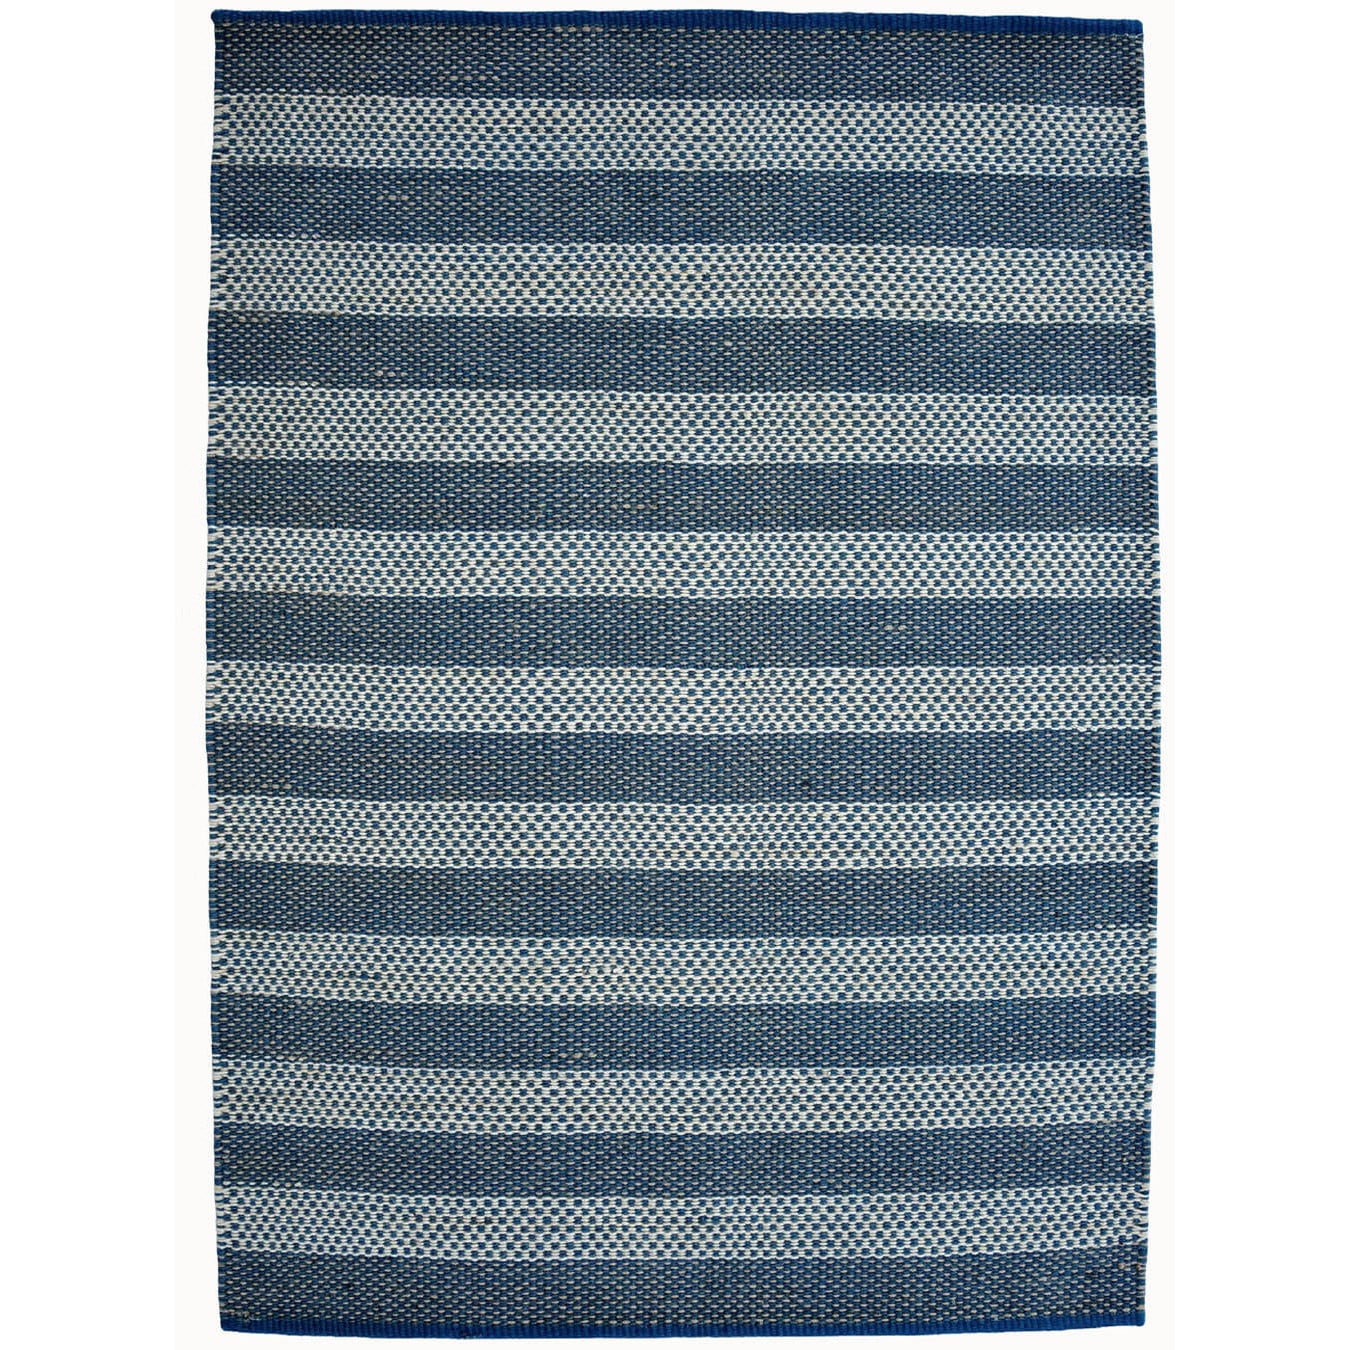 Hand woven Blue Contemporary Tie Die Rug (6 X 9)